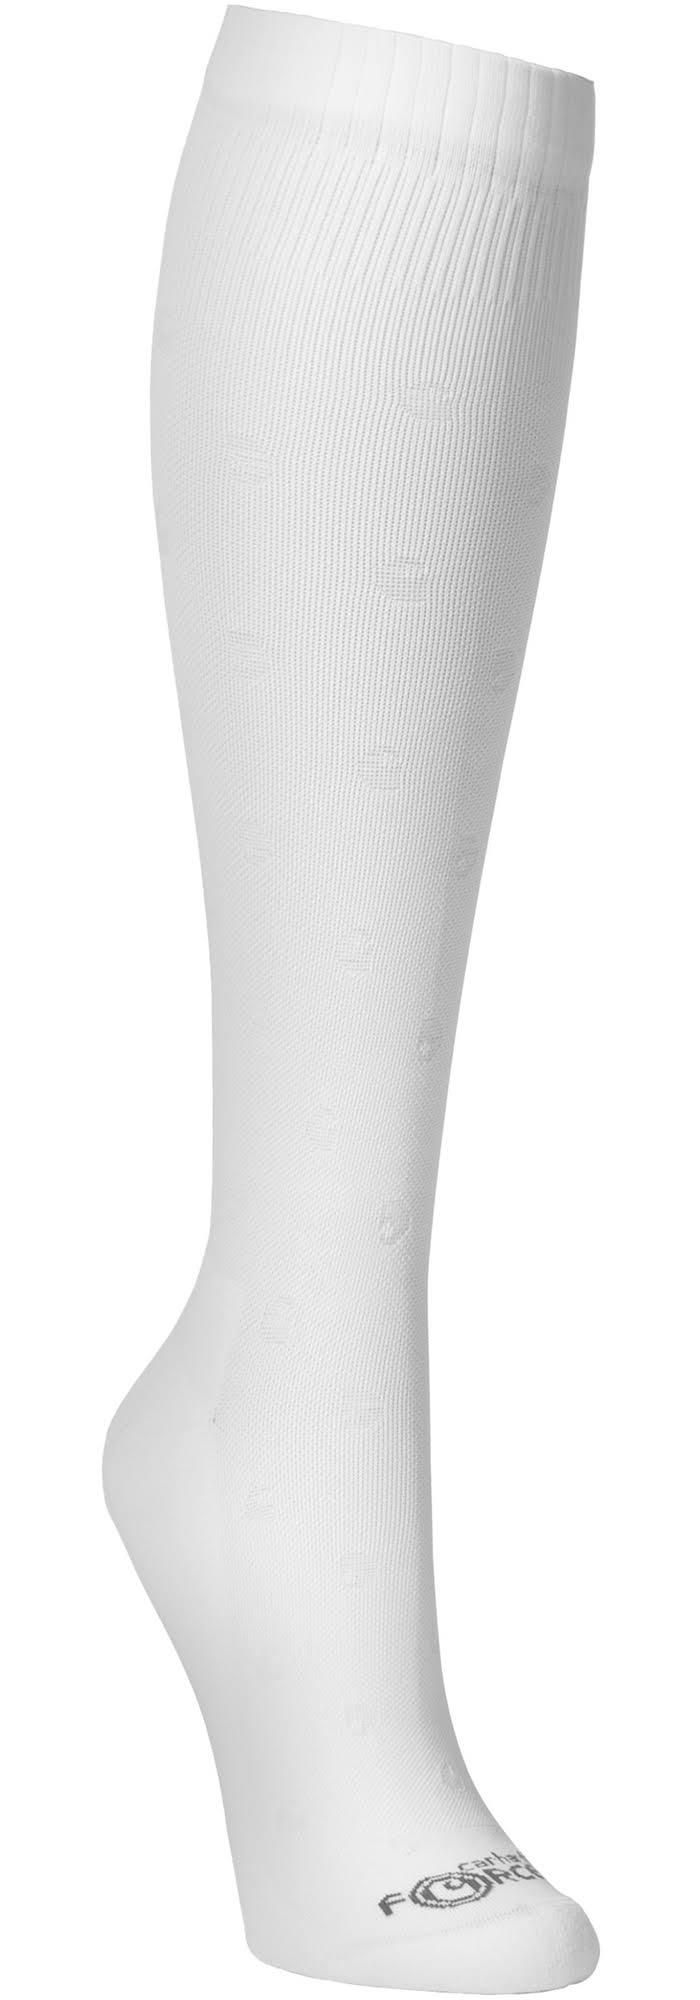 *SALE* ONLY (4) PAIR OF WHITE LEFT!! Carhartt Socks Women's Moderate Compression Boot